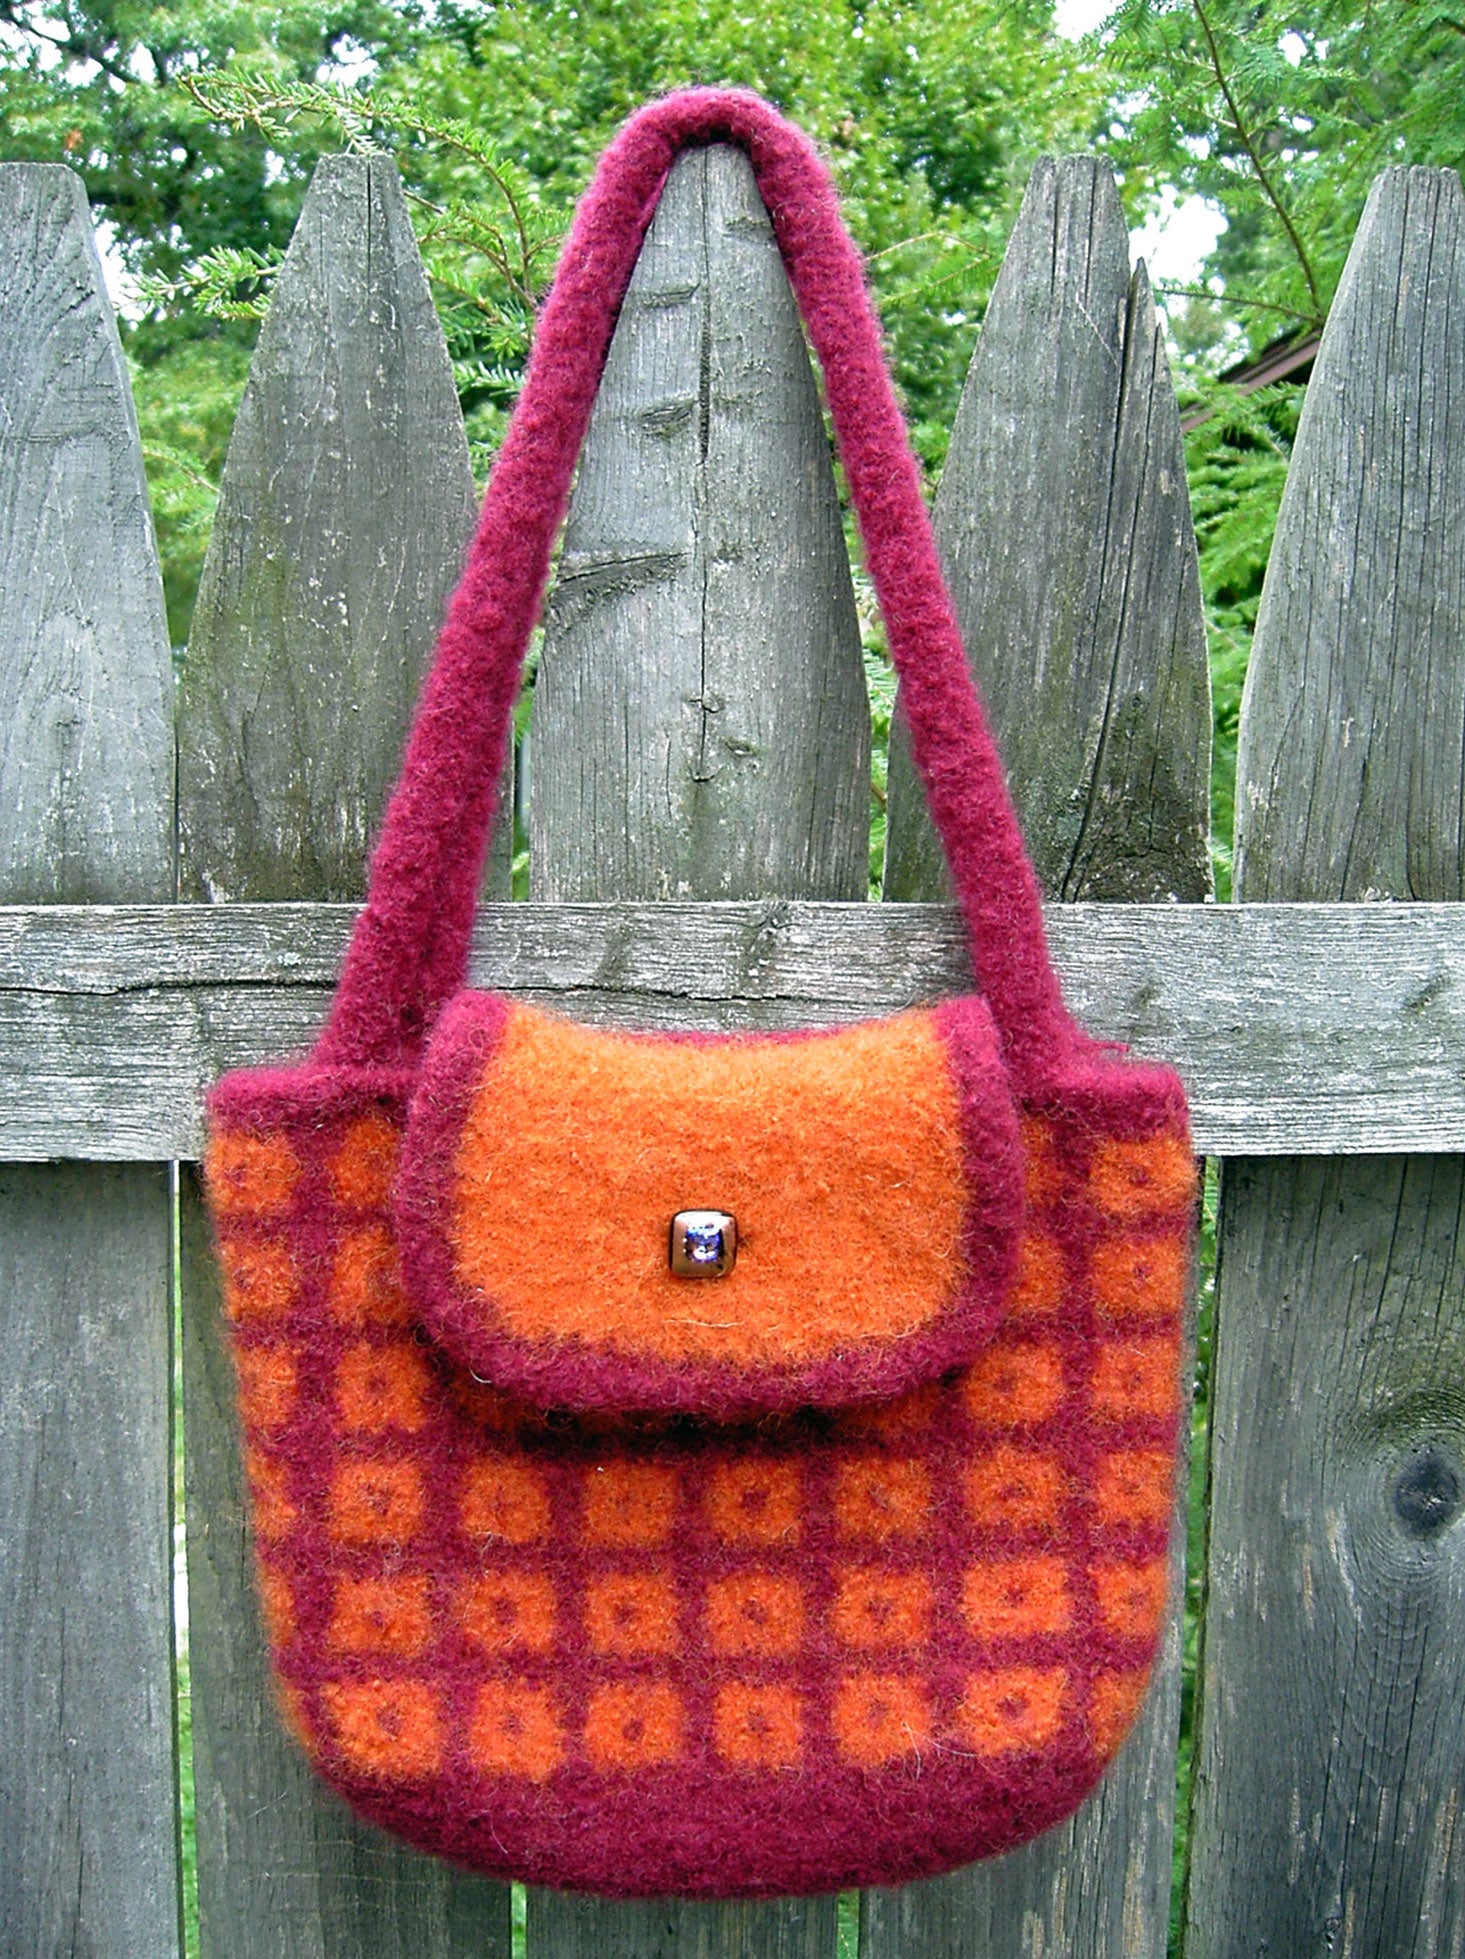 Phone Pouch Free Crochet Pattern – Felted Button